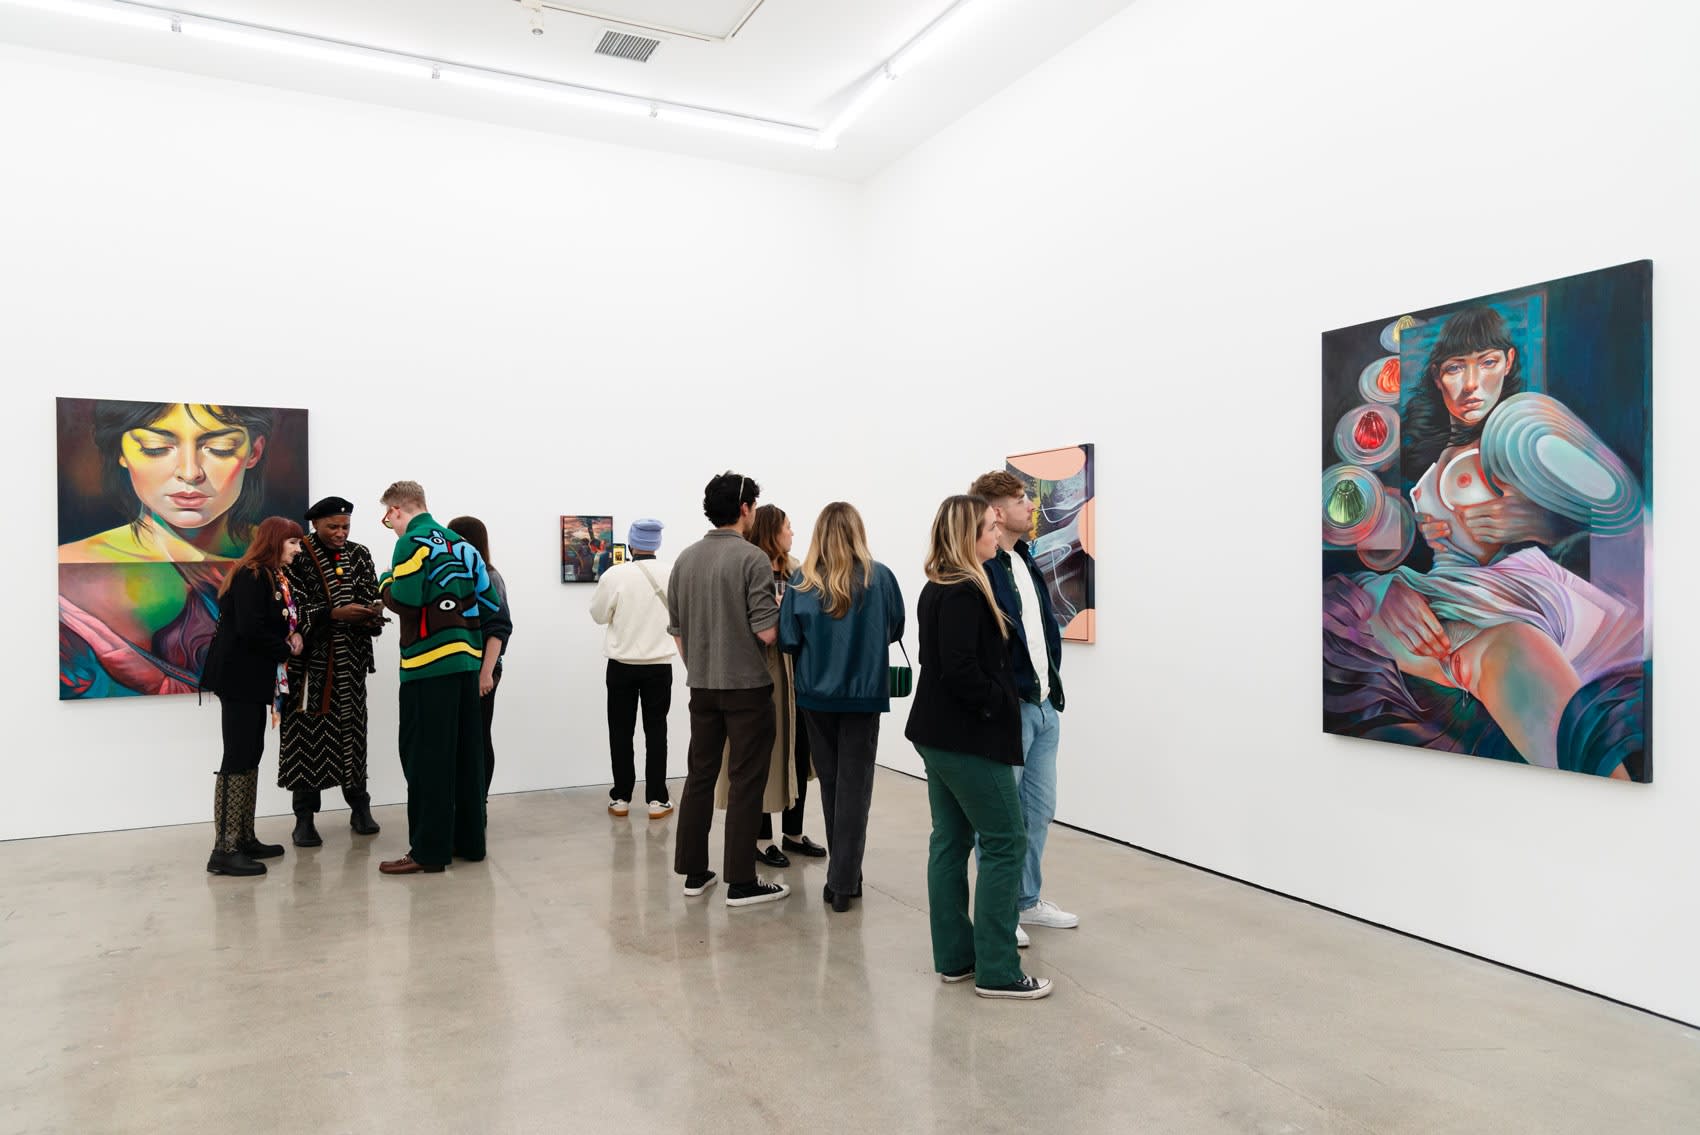 Image of a group of peopel talking at an art gallery with white walls and a concrete floor at the opening of Martine Johanna's solo exhibition 